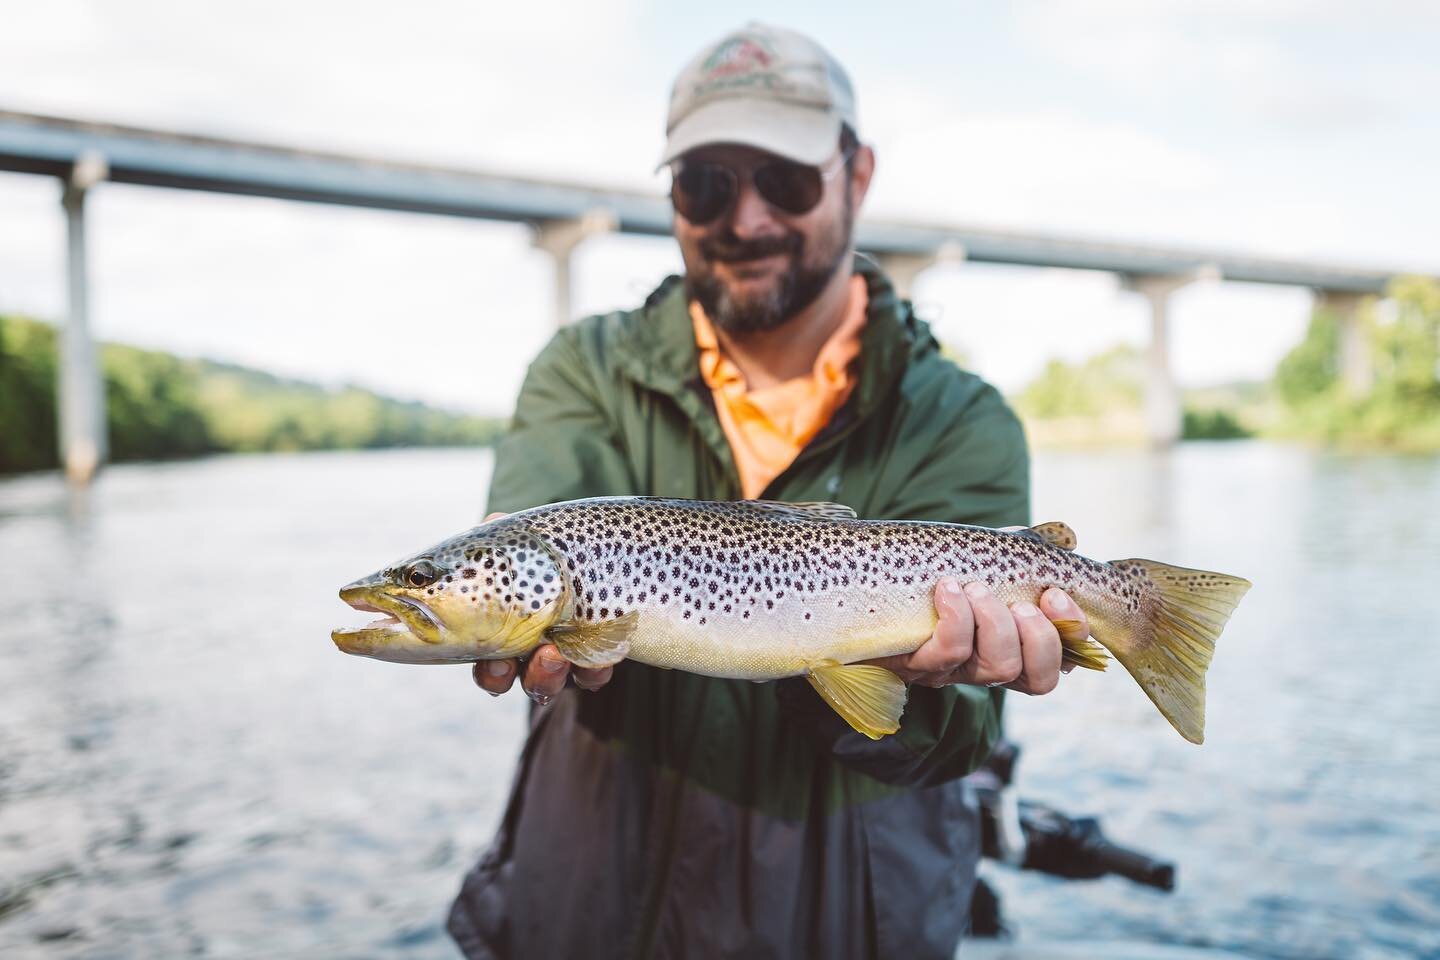 @chefalanrules and @awseay brought some cool weather with them and even cooler fishing. The hopper fishing seems to get better and better every day!